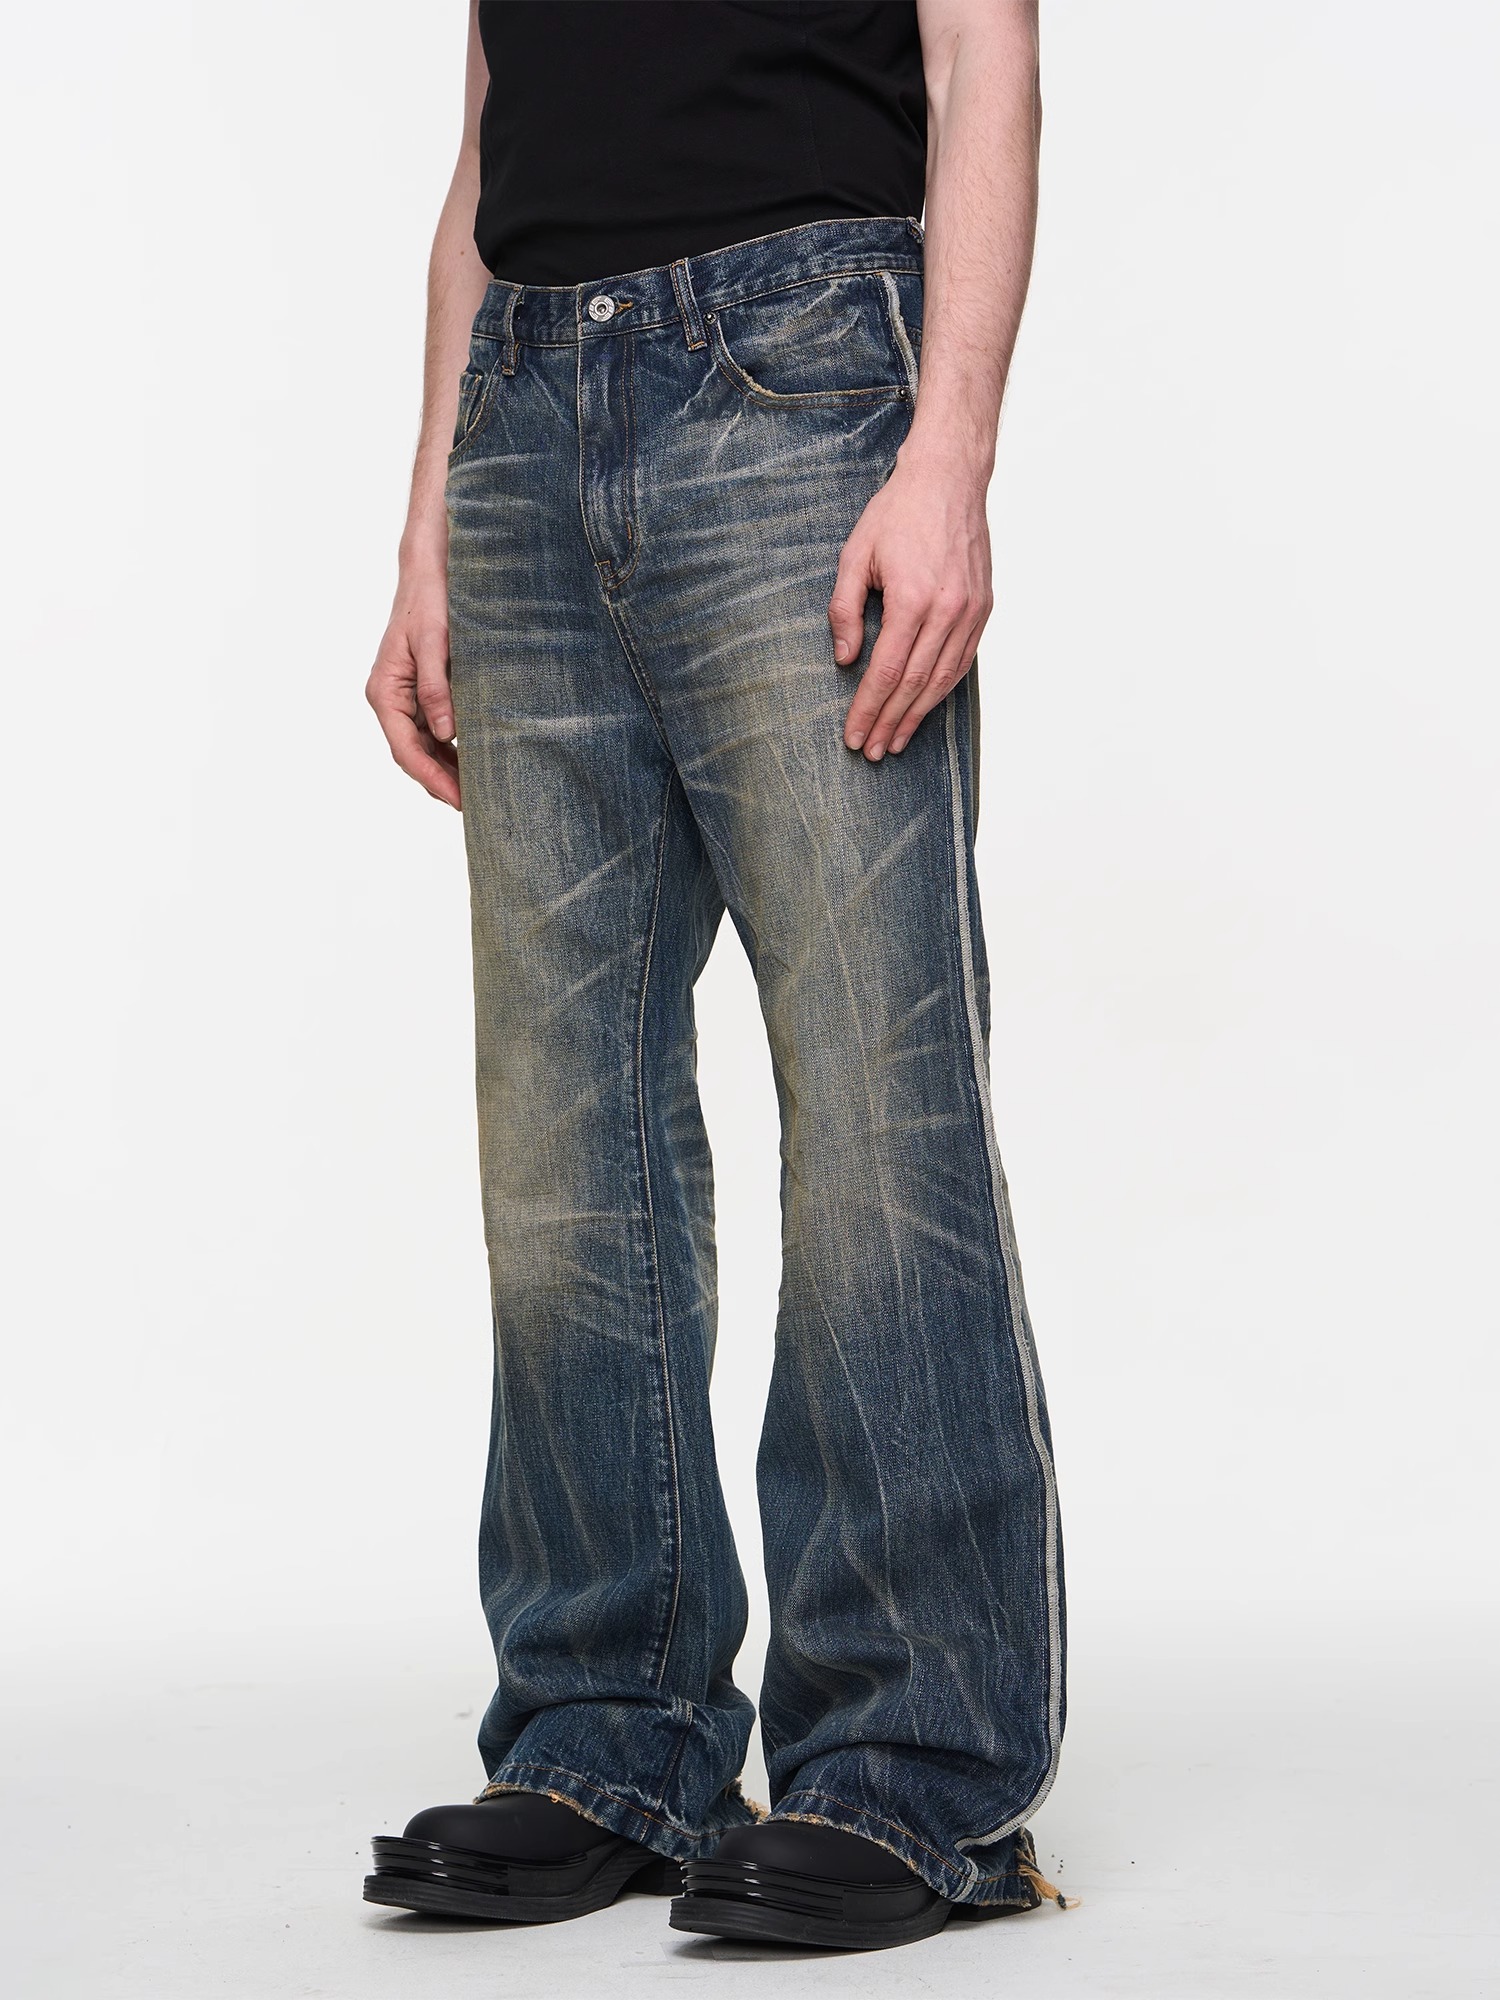 BLINDNOPLAN 24SS Blue Washed Whiskered Bootcut Jeans